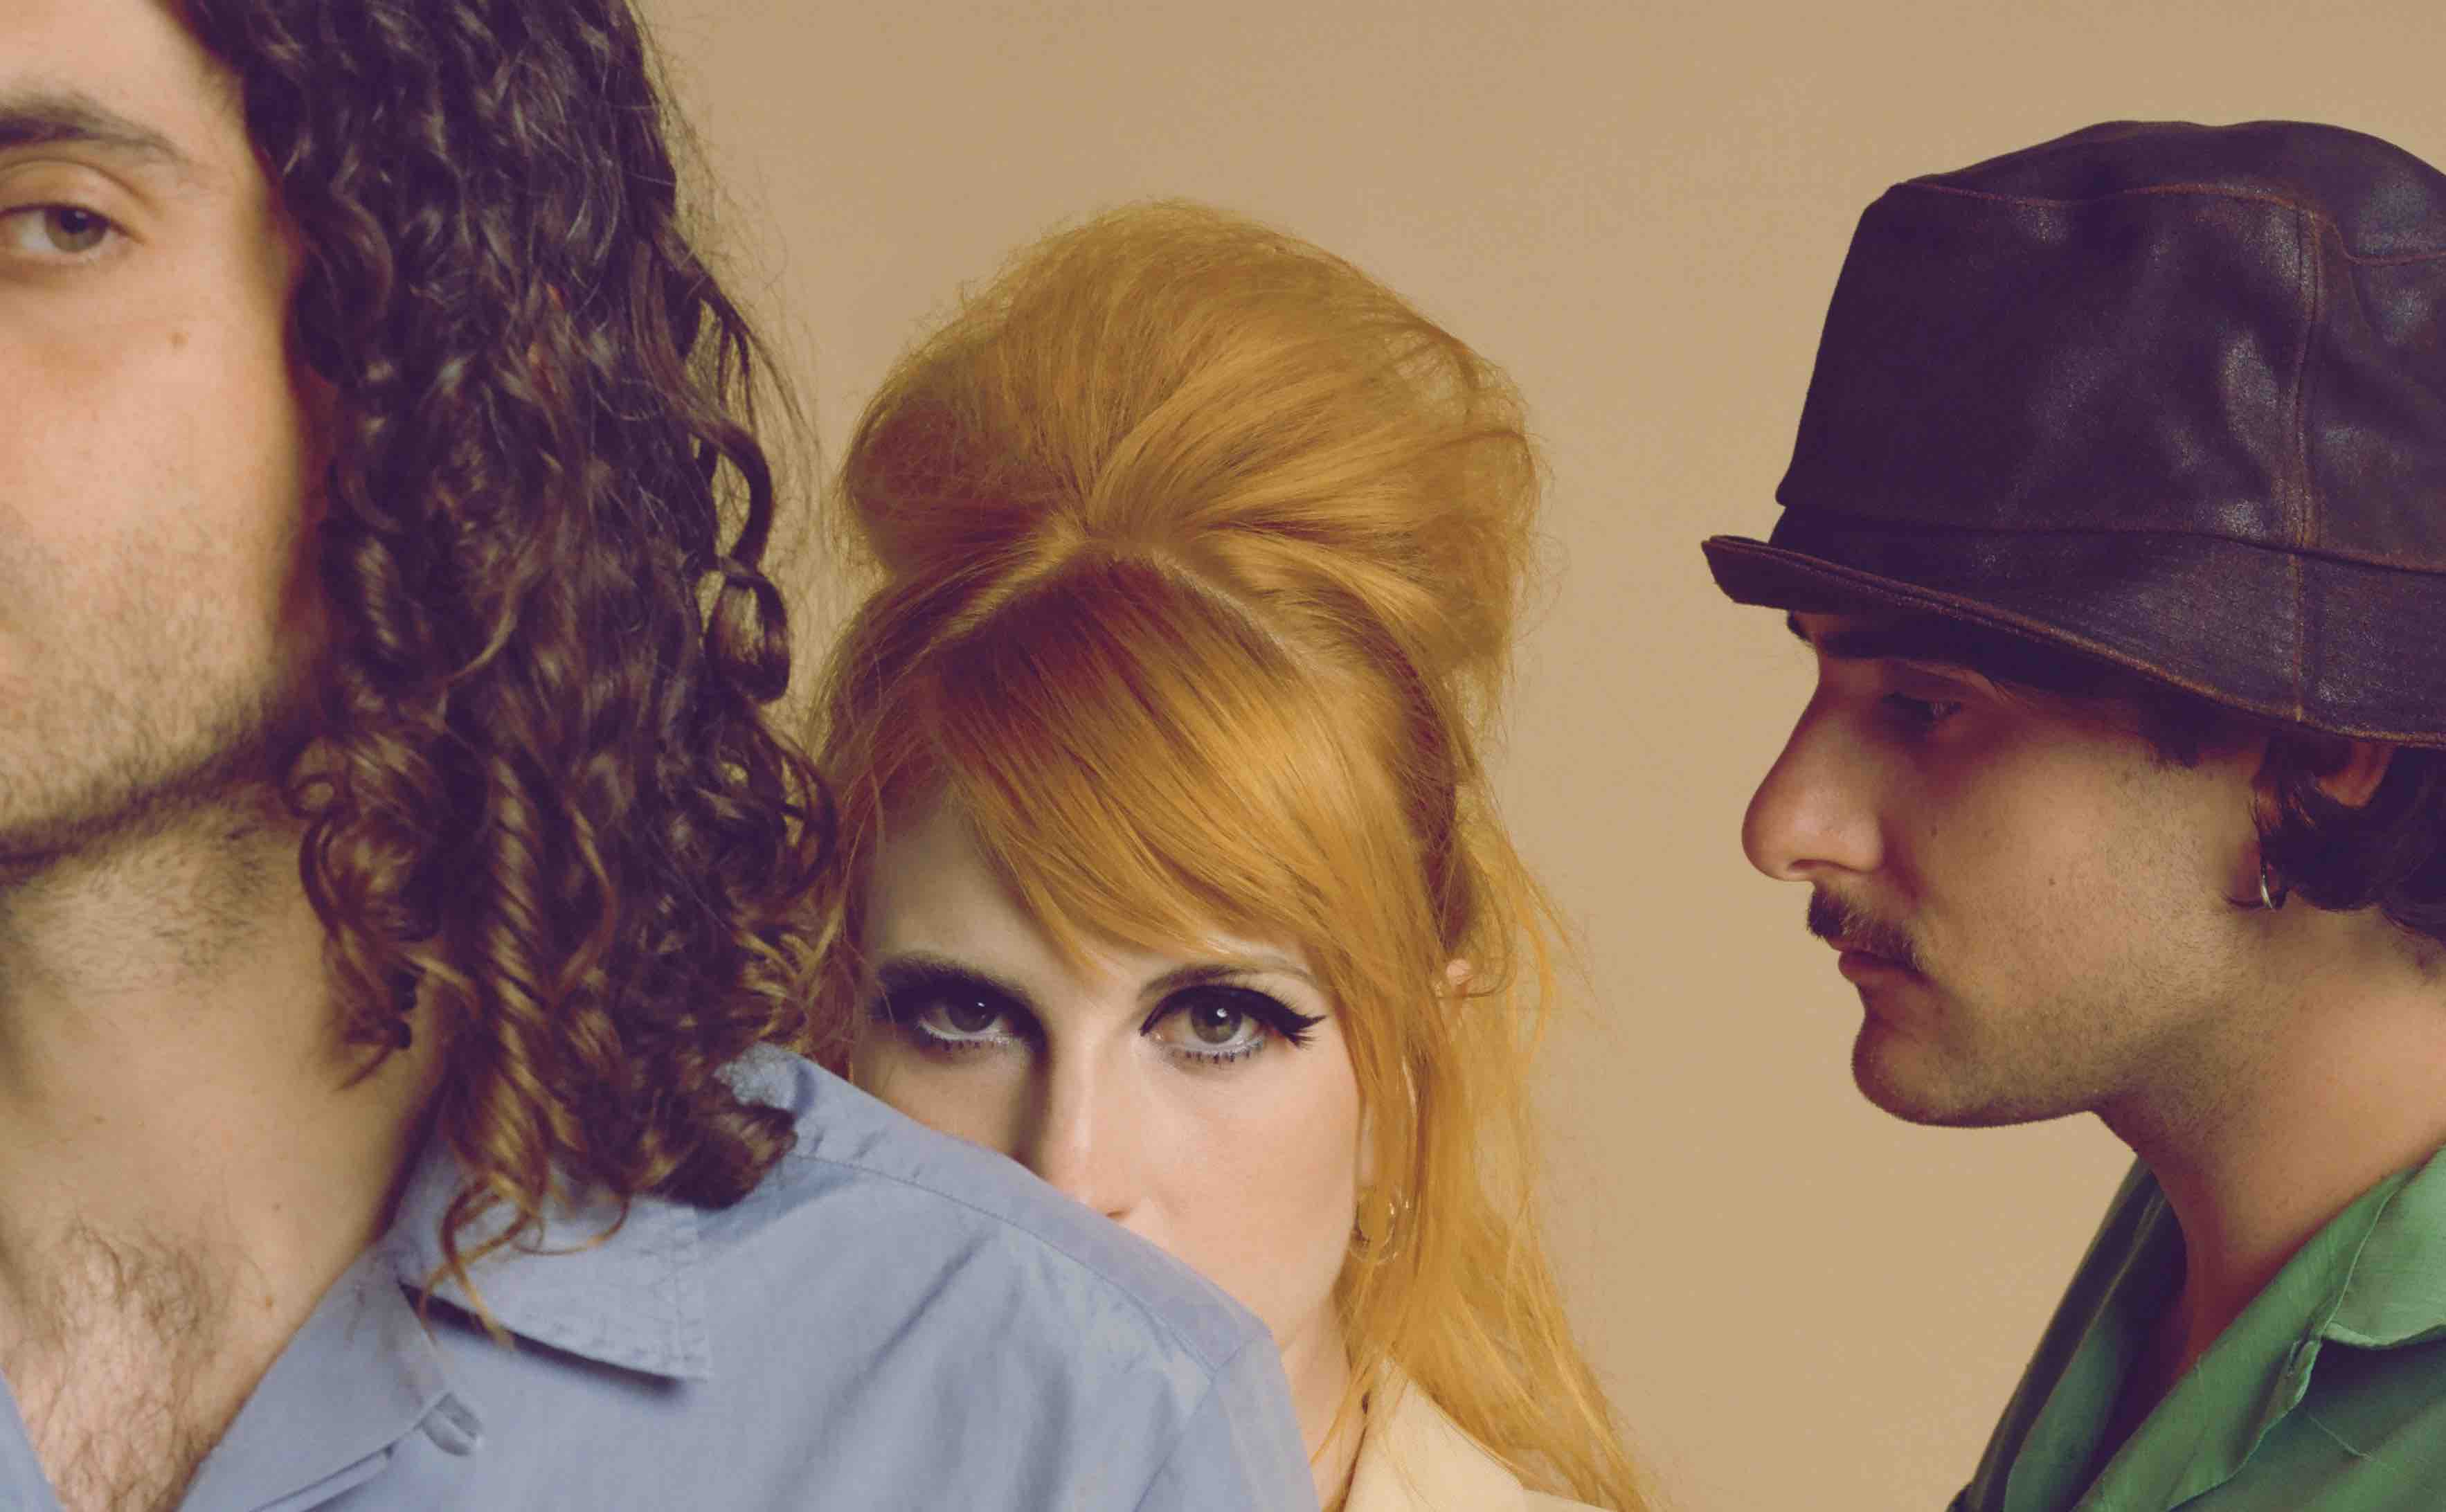 FLOOD - Paramore Release “This Is Why,” Their First New Song in Five Years